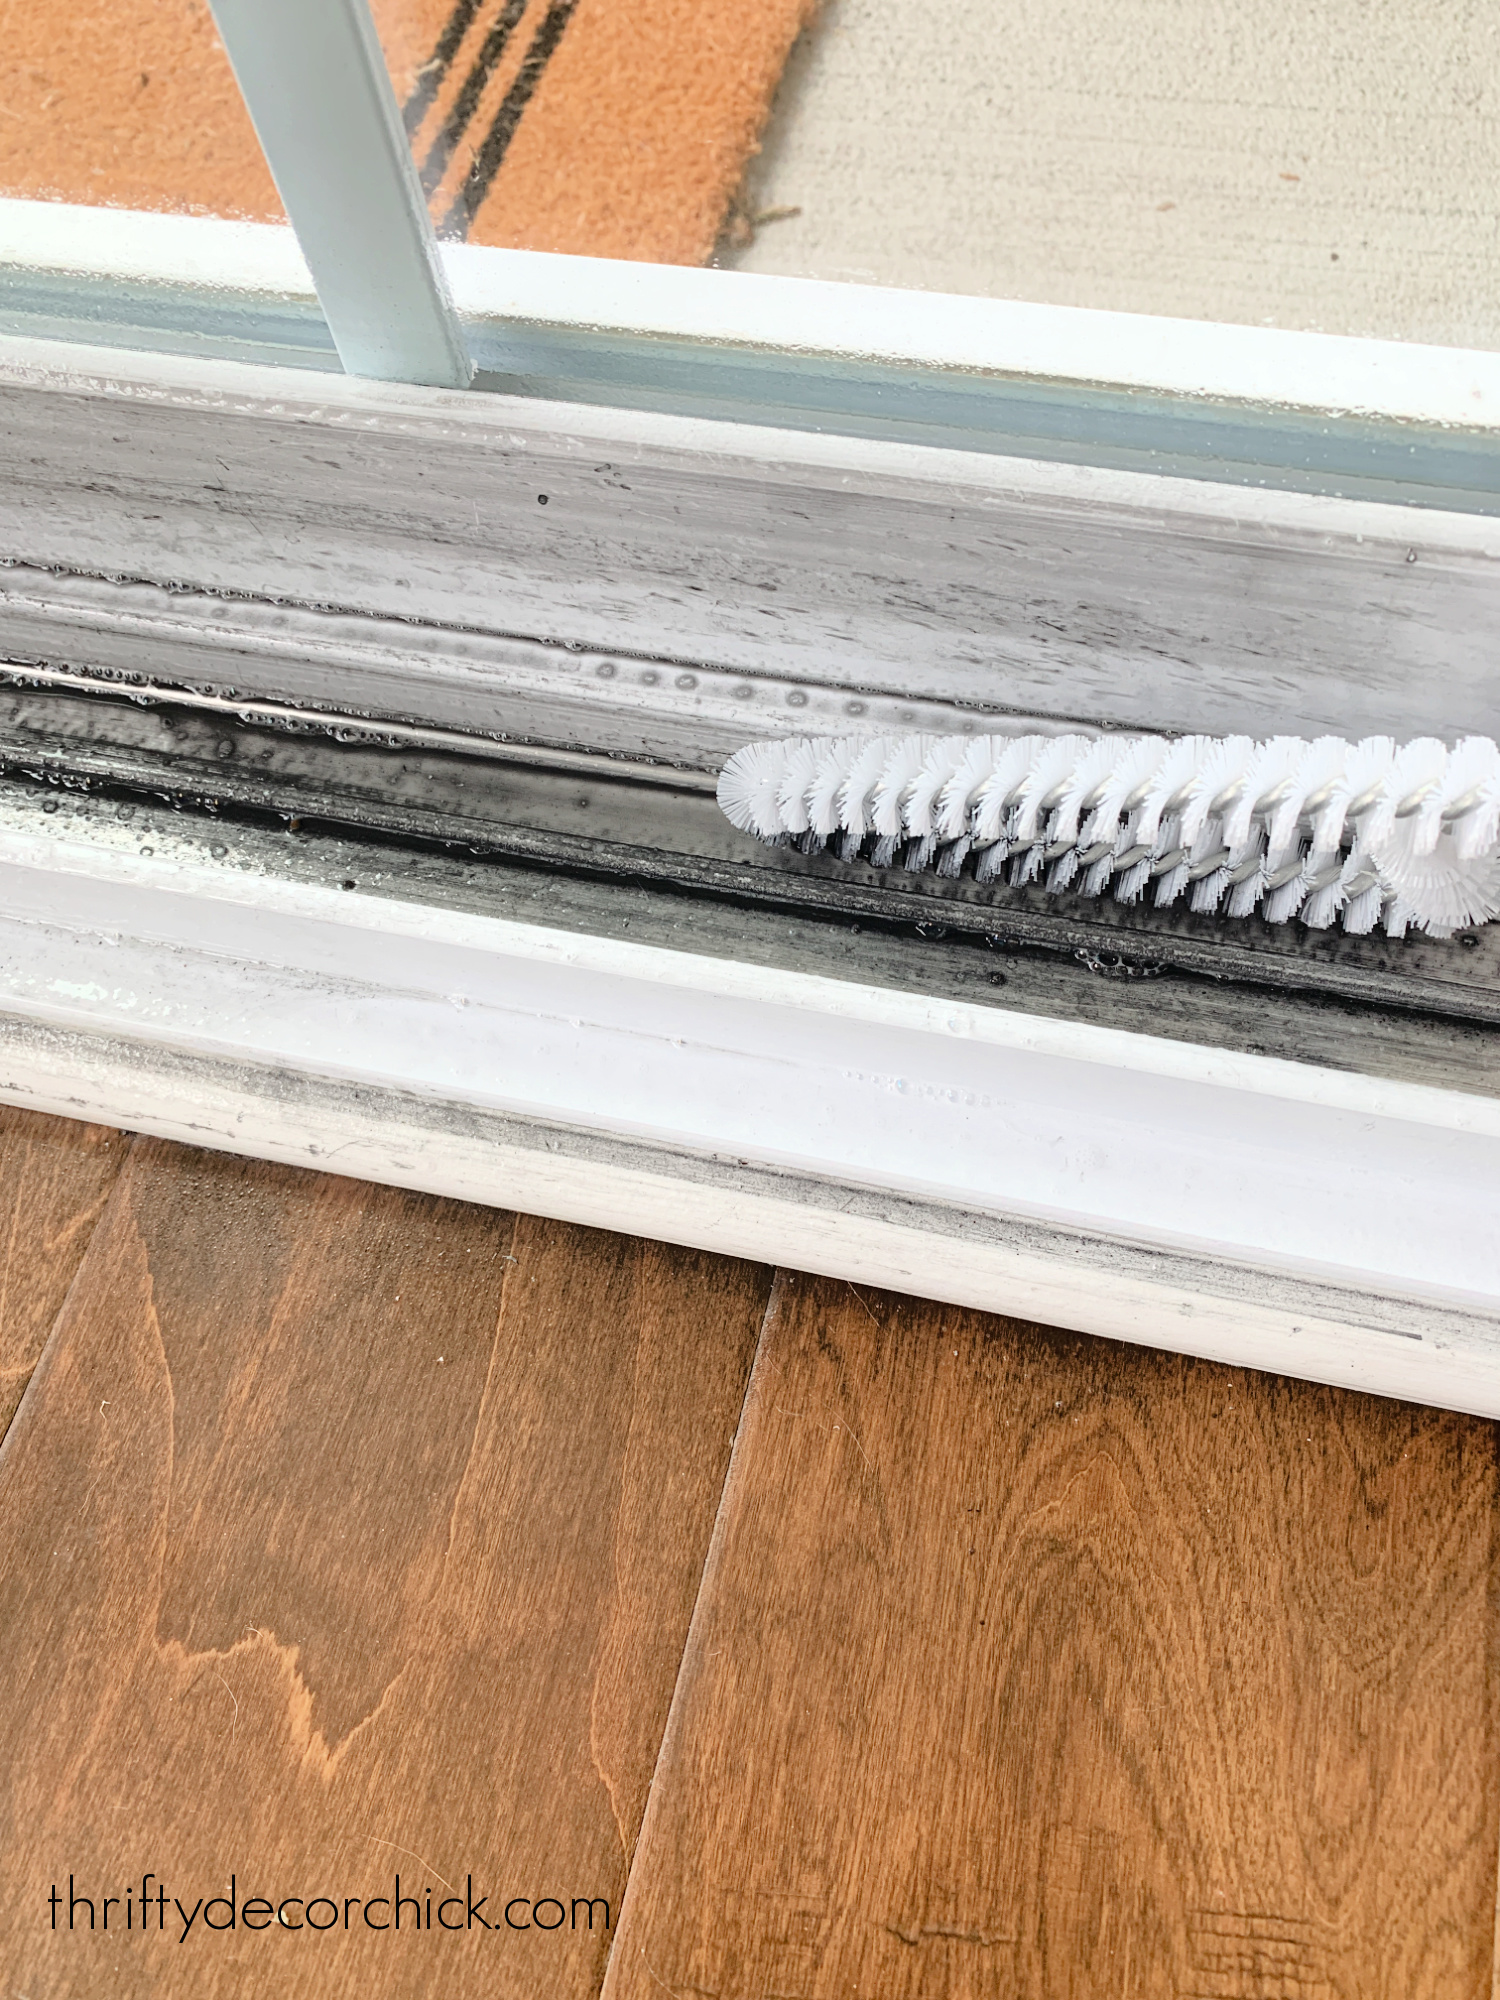 How to clean dirty sliding door tracks